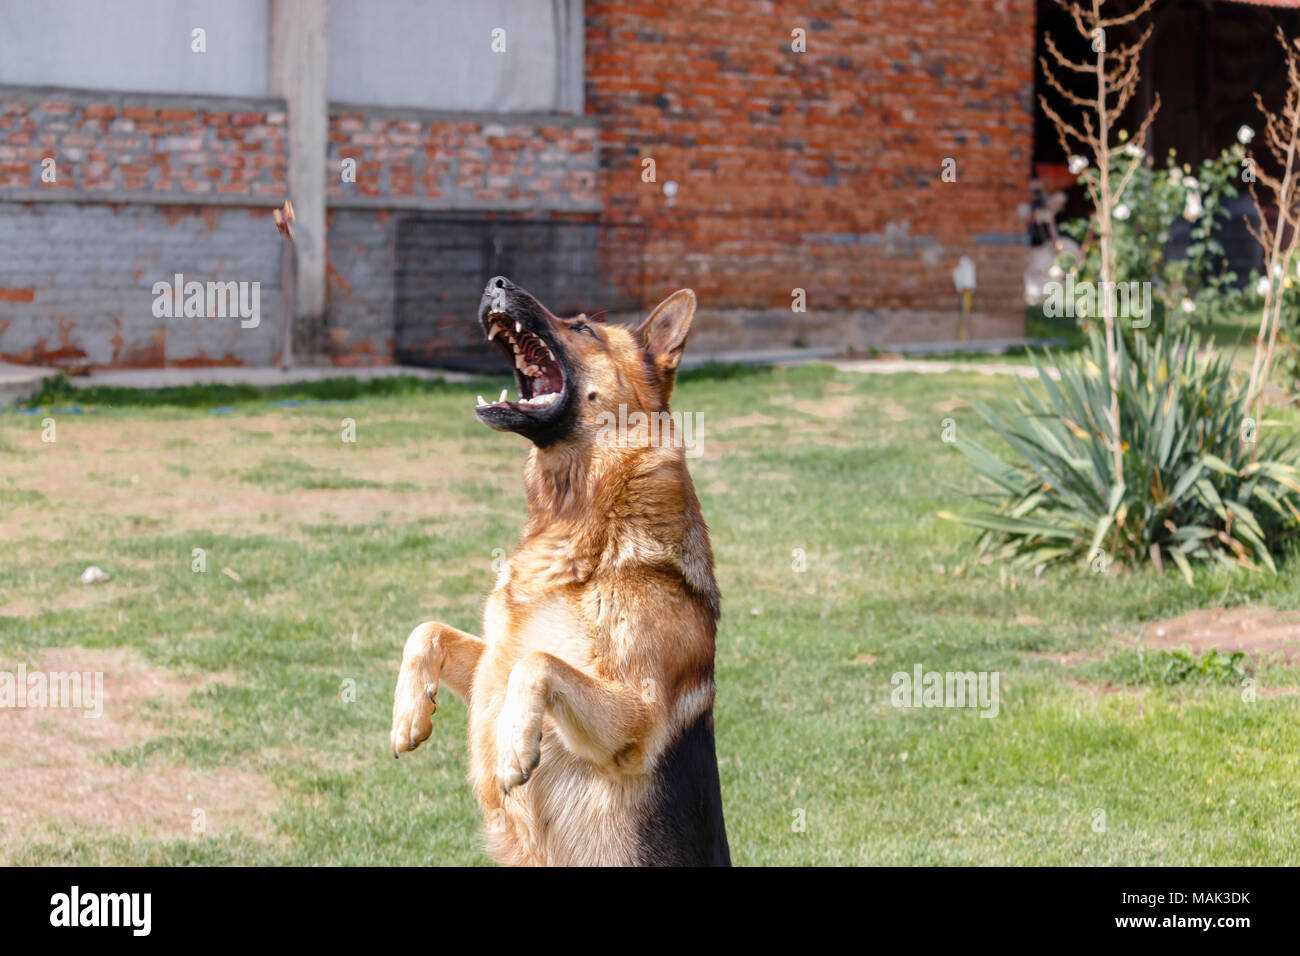 The boss threw food on his dog and the dog jumped to catch it. Stock Photo